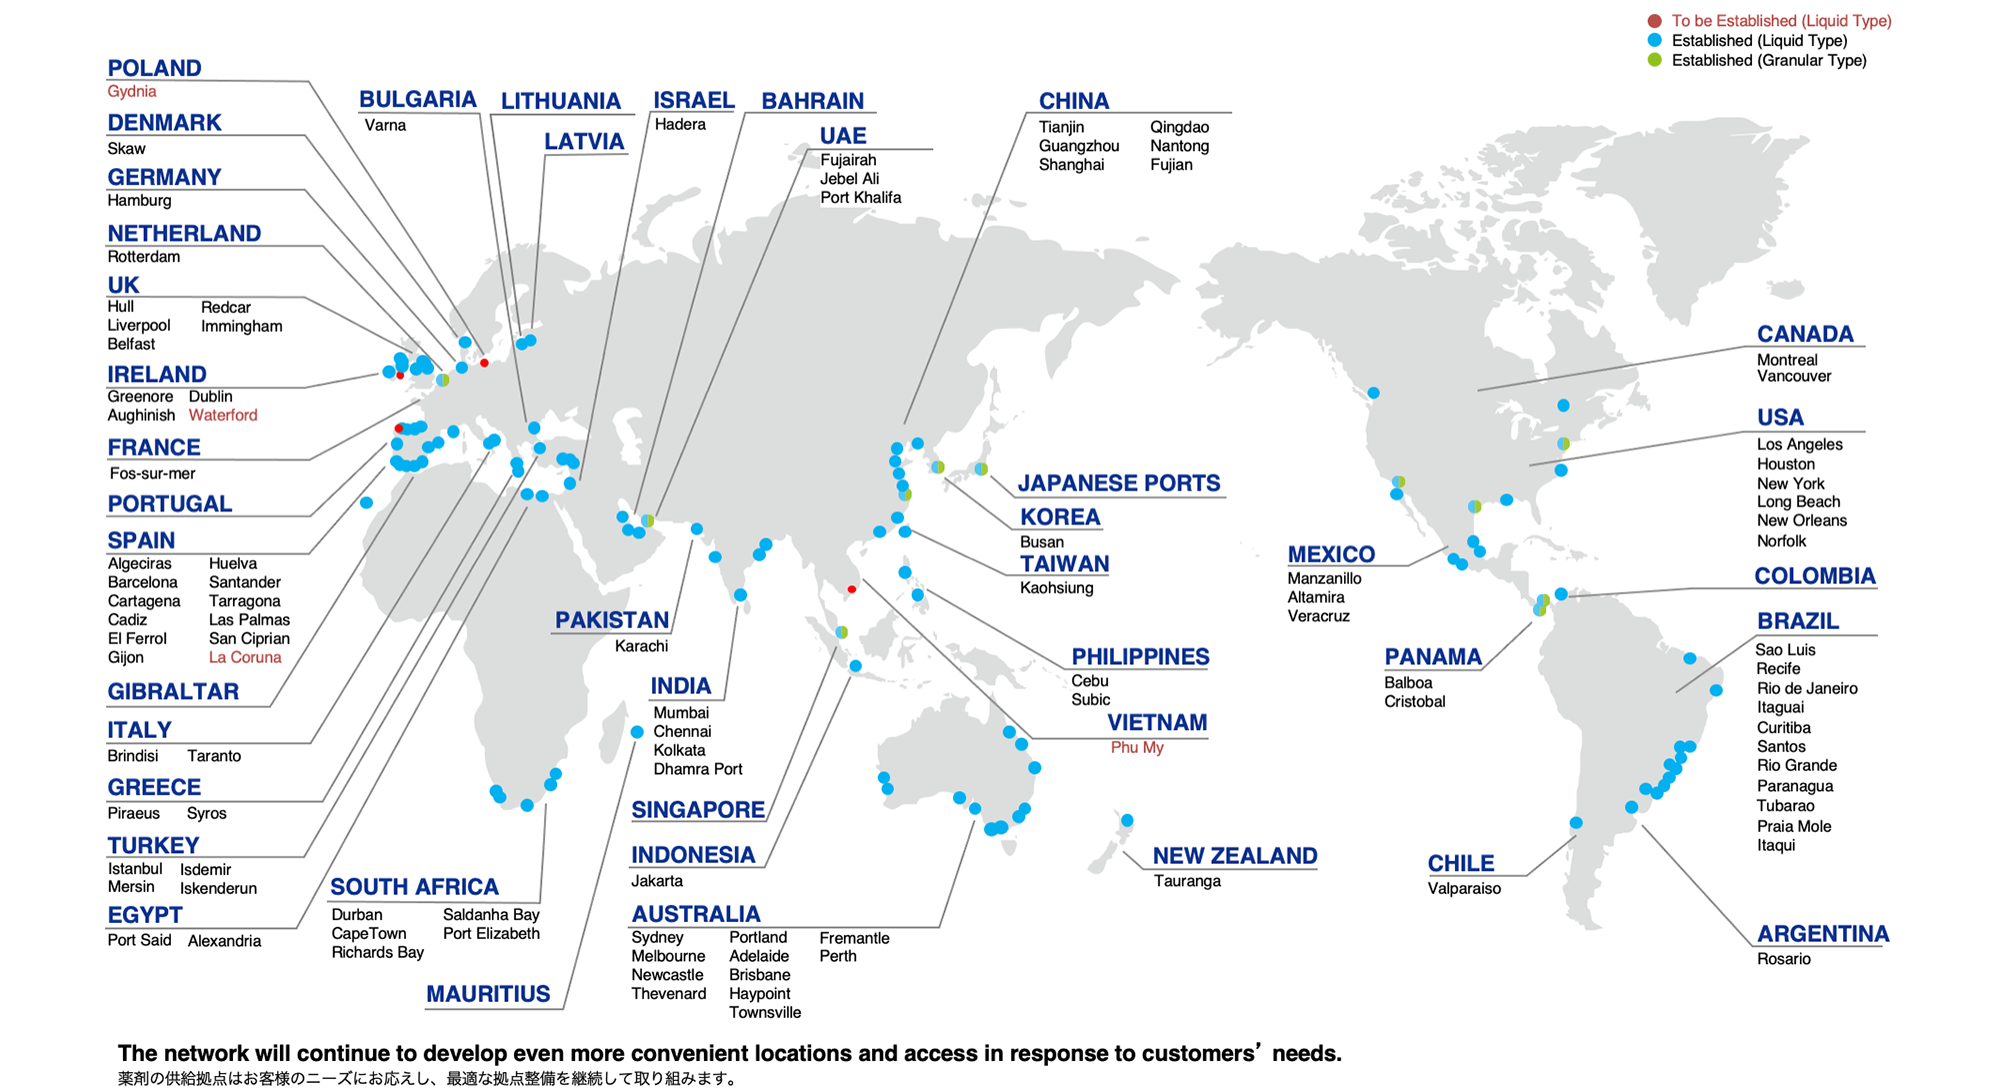 Chemical Supply Ports